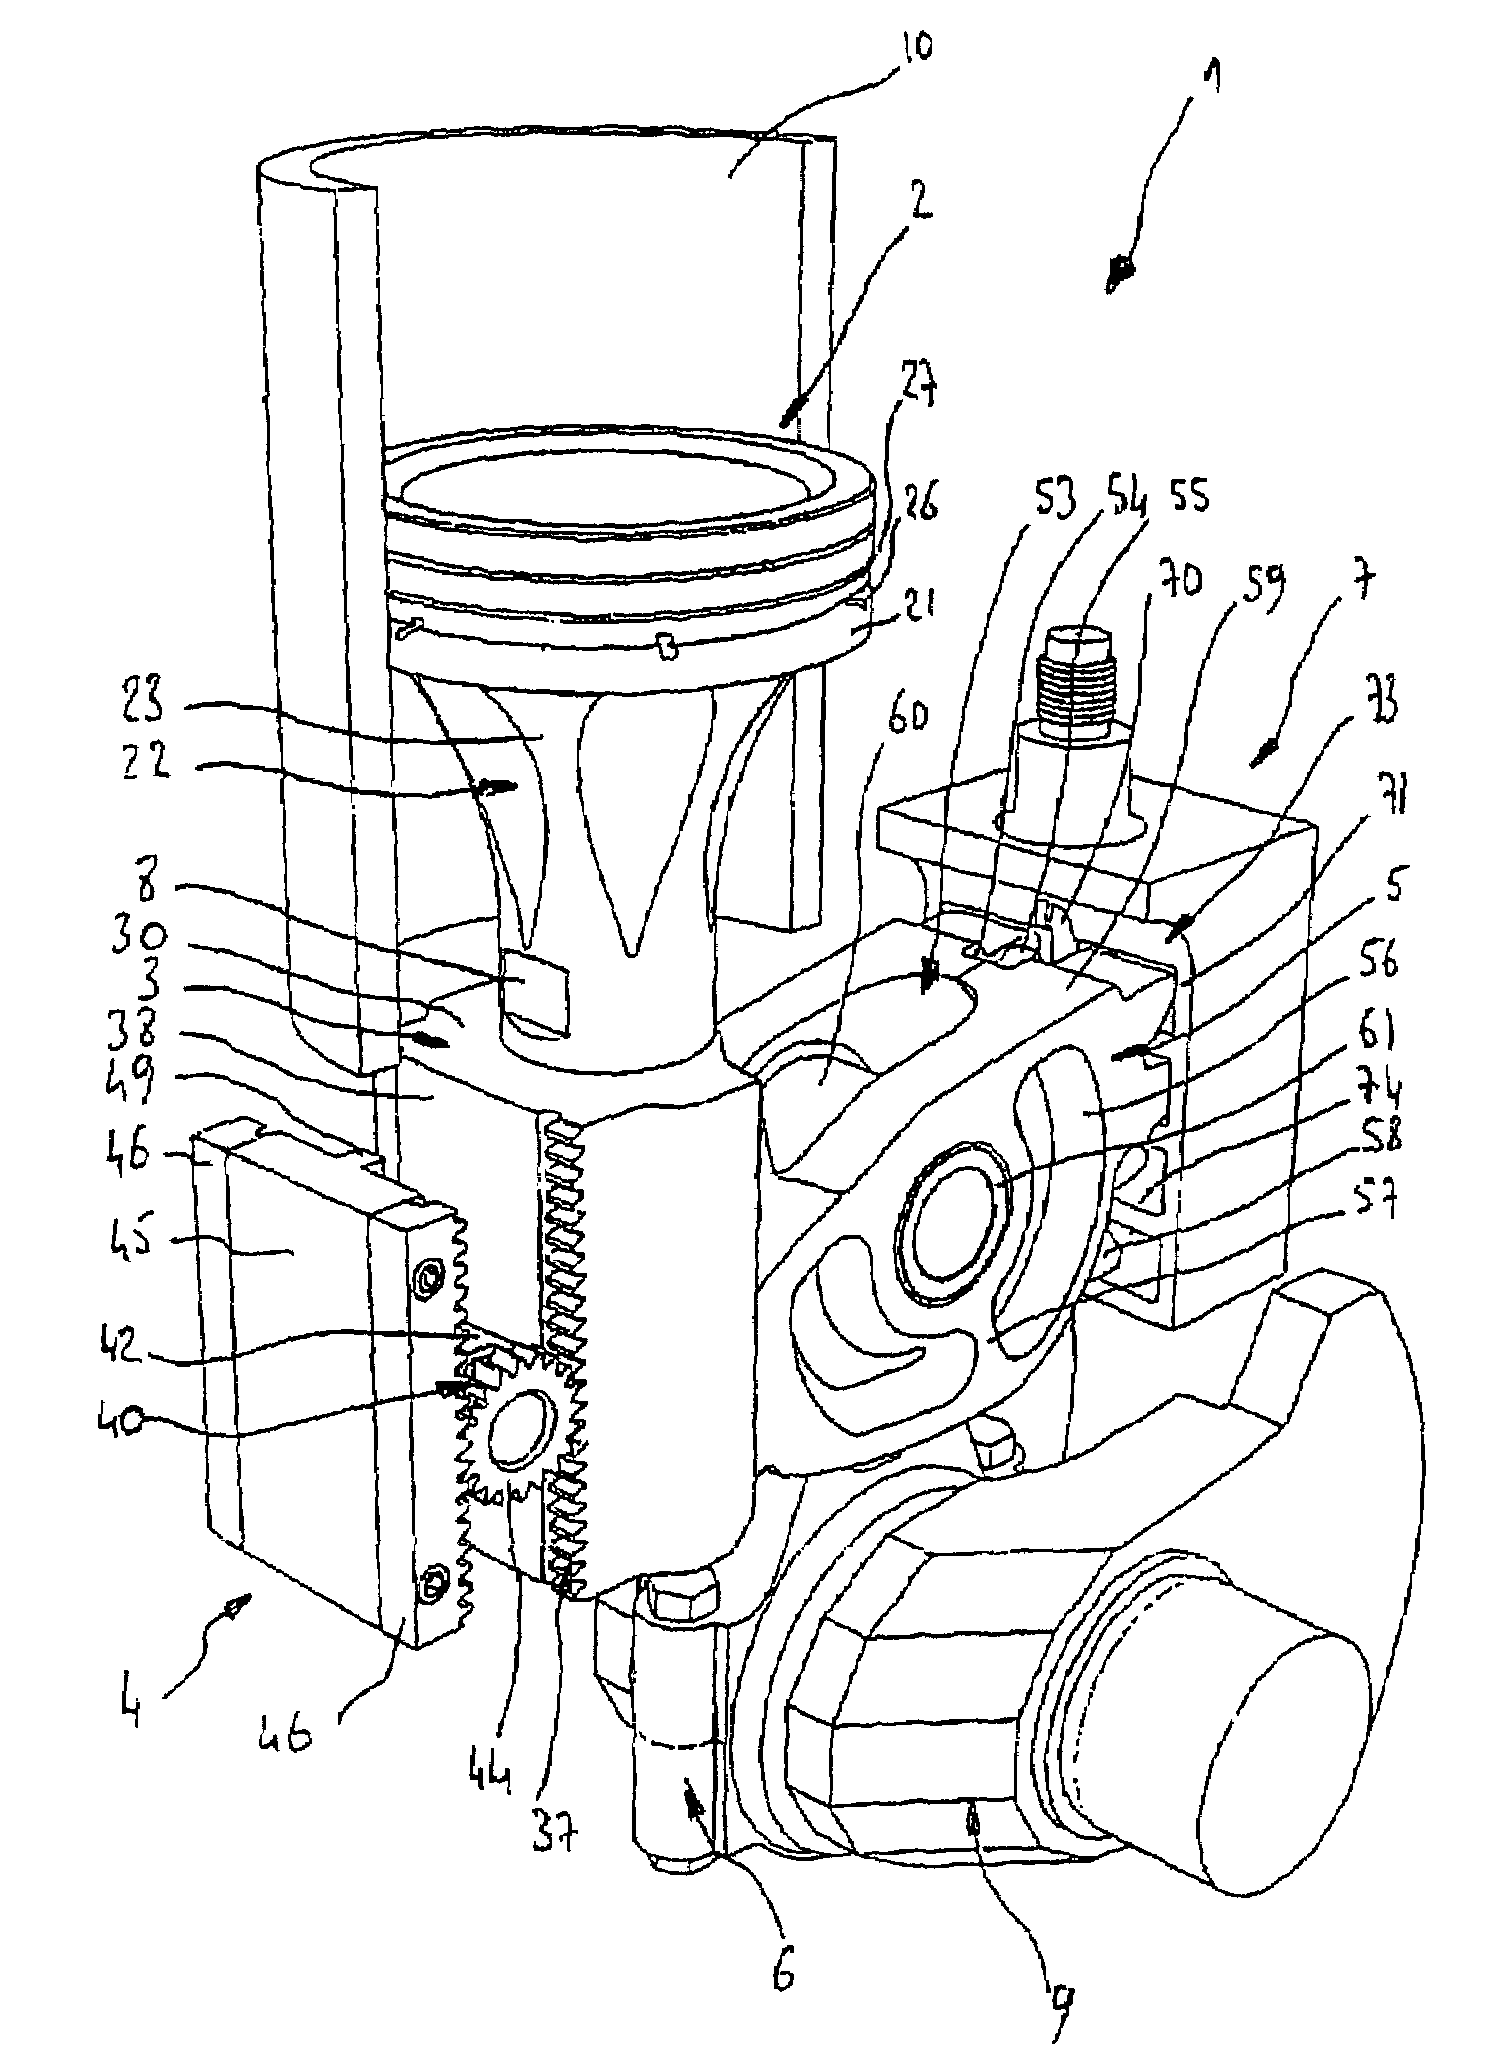 Variable cylinder capacity engine